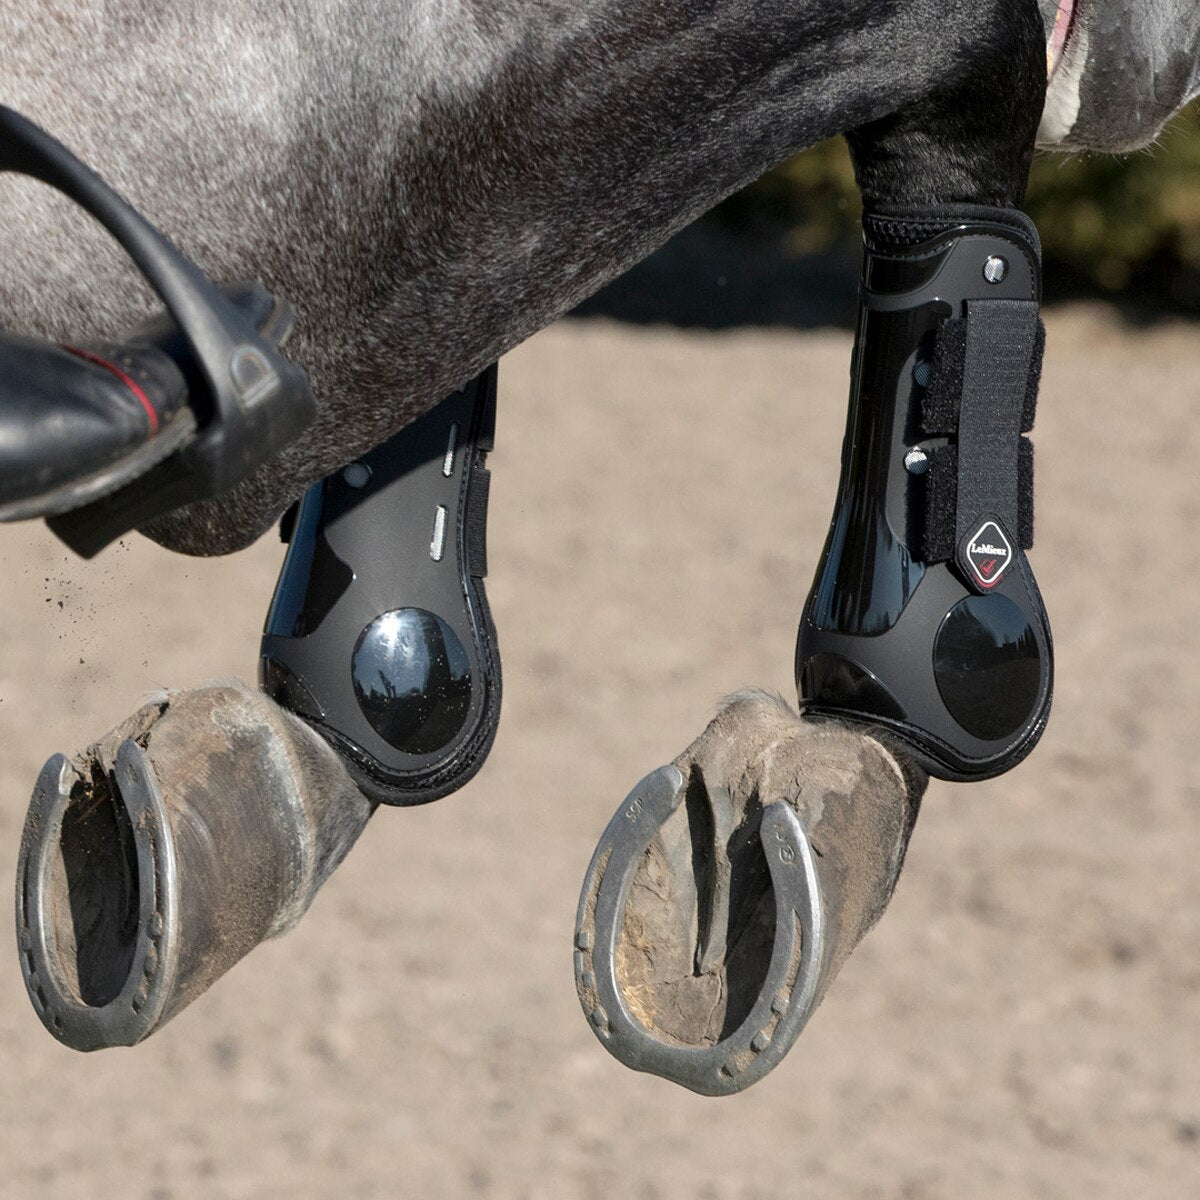 This reliable and well-fitting tendon boot features a TPU shell with integrated venting to prevent the horse's leg from overheating. Ergonomically shaped to conform to the horse's leg, Derby ProJump boots feature a cushiony lining and strategically placed